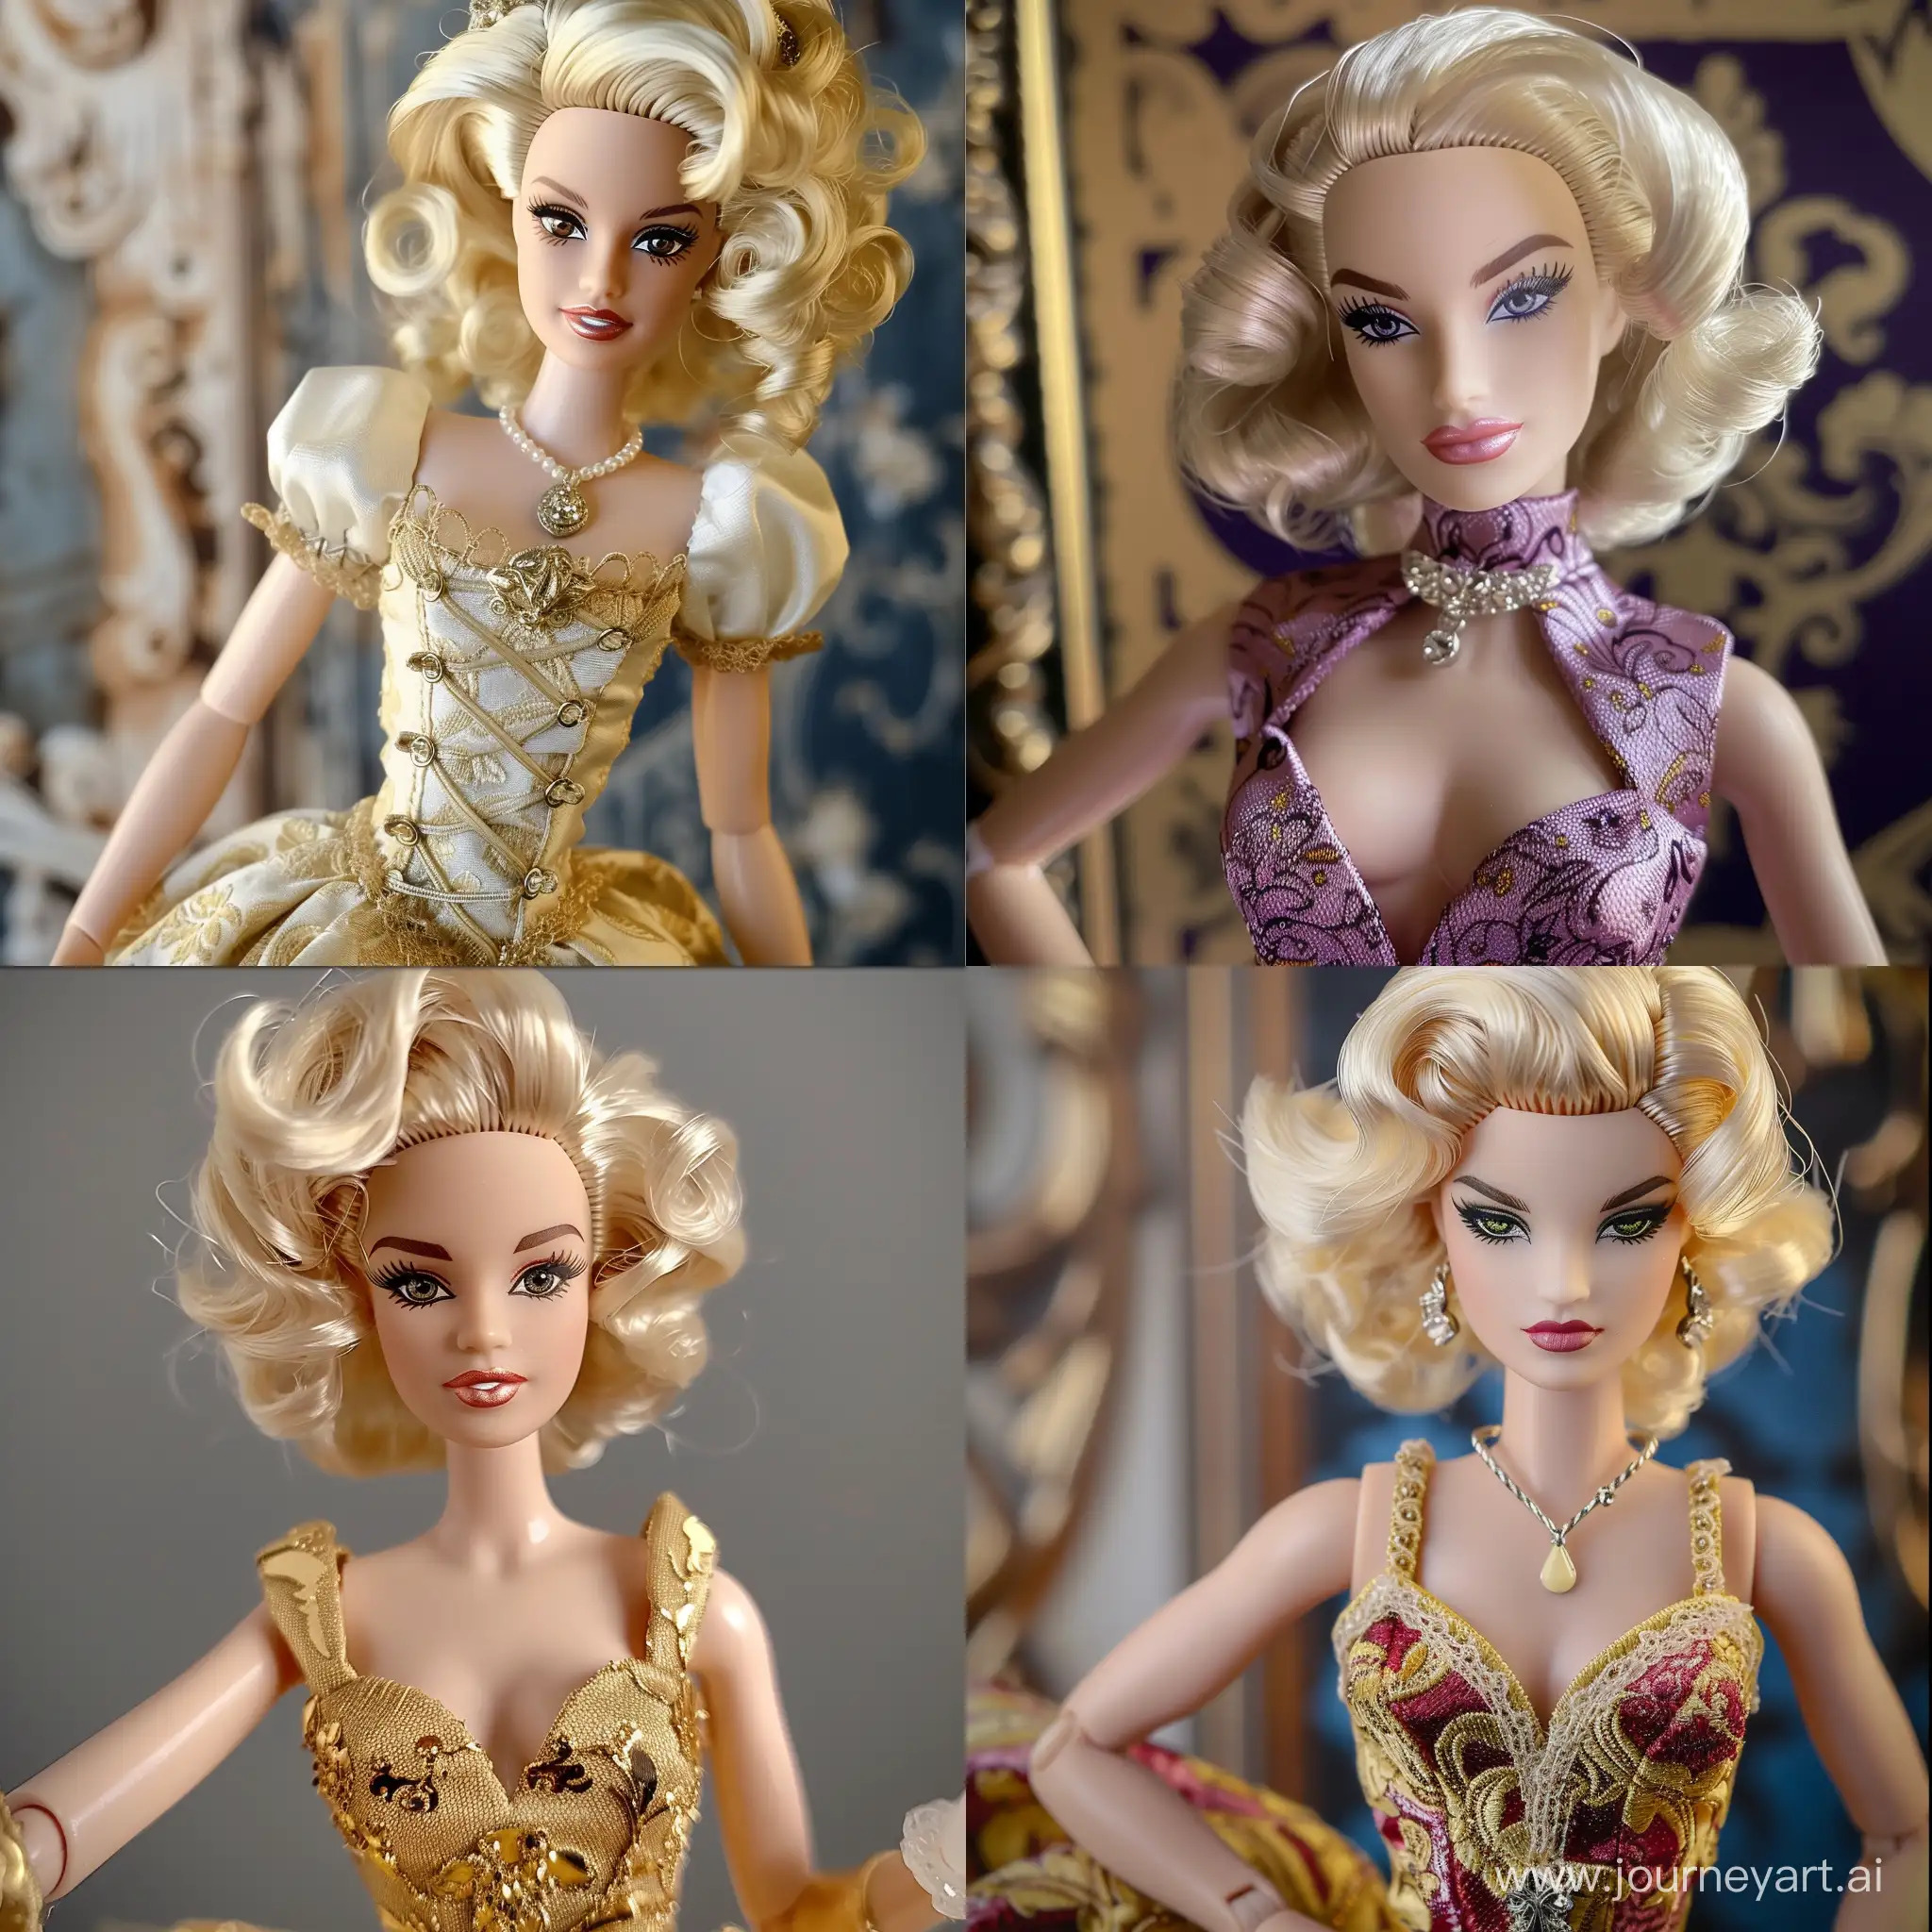 Marilyn-Monroe-Ever-After-High-Doll-Concept-Retro-Glamour-in-Princess-Dress